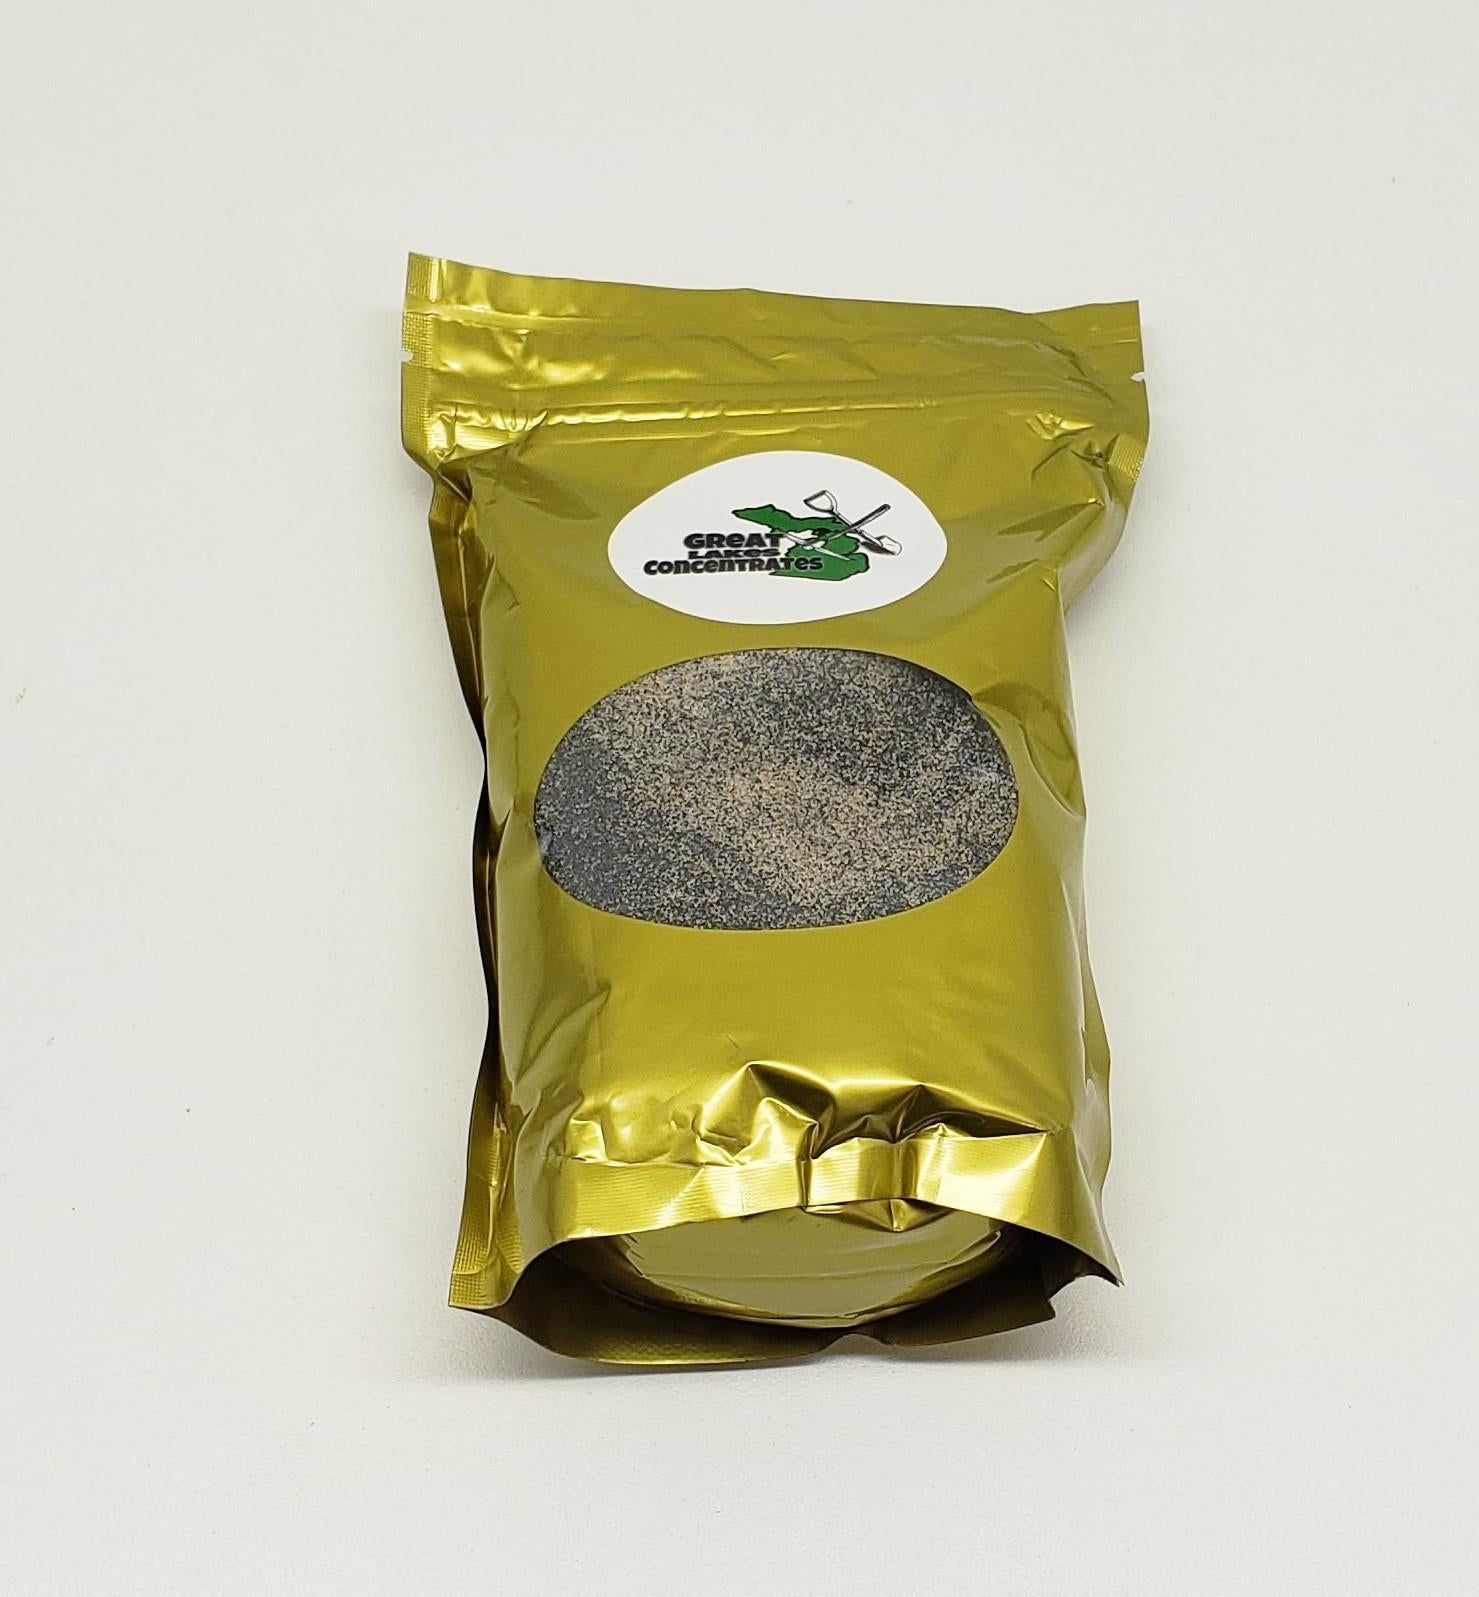 Great Lakes Concentrates Pay Dirt $45 bag - Prospectors Dream